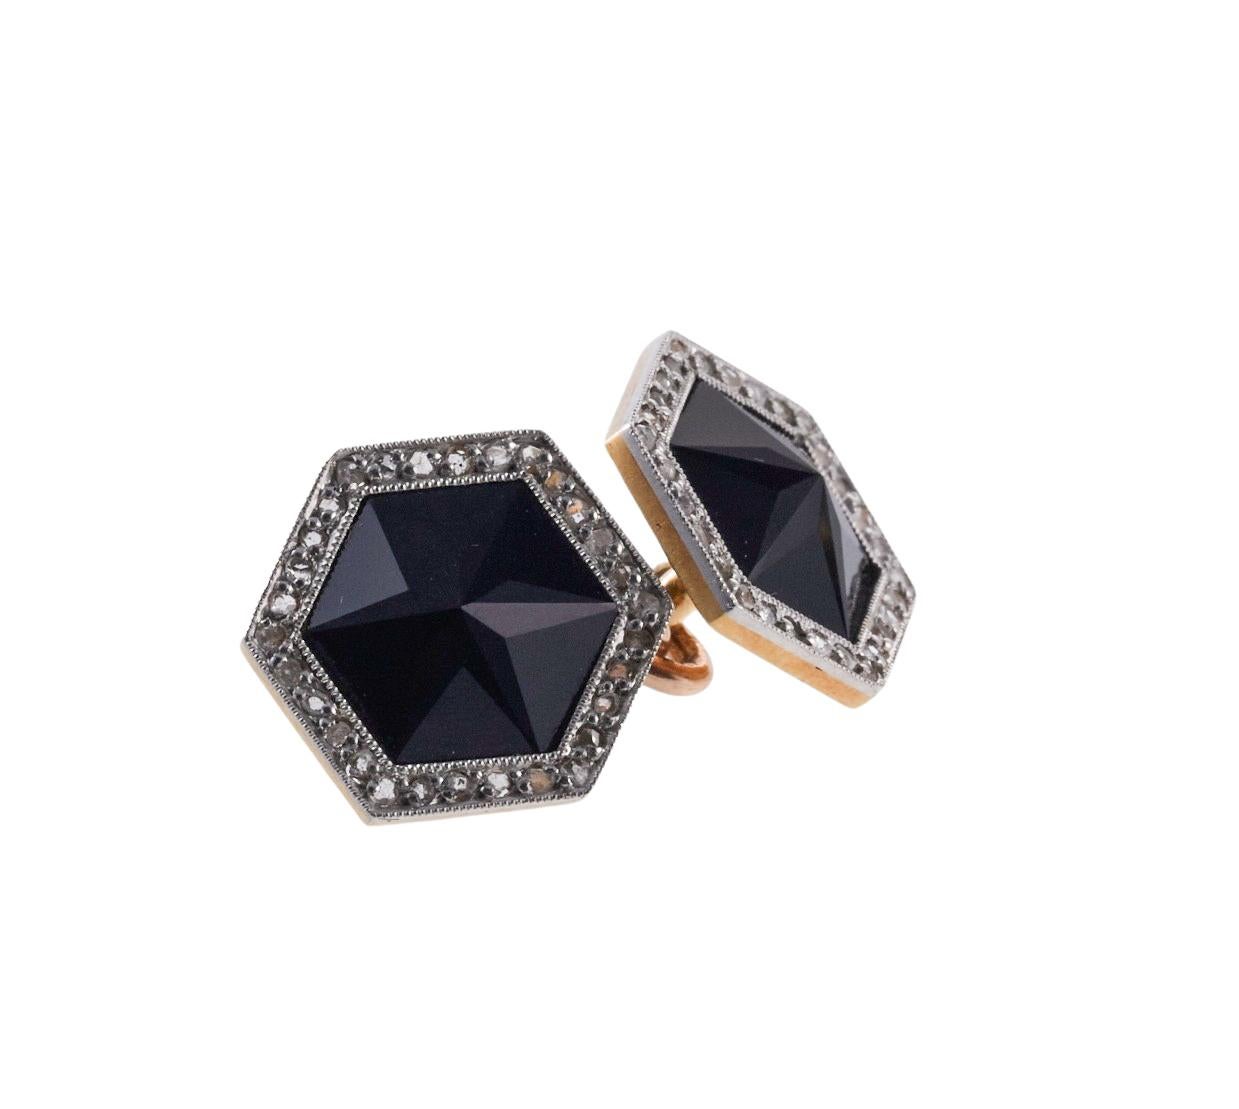 Art Deco English Diamond Onyx Gold Cufflinks In Excellent Condition For Sale In New York, NY